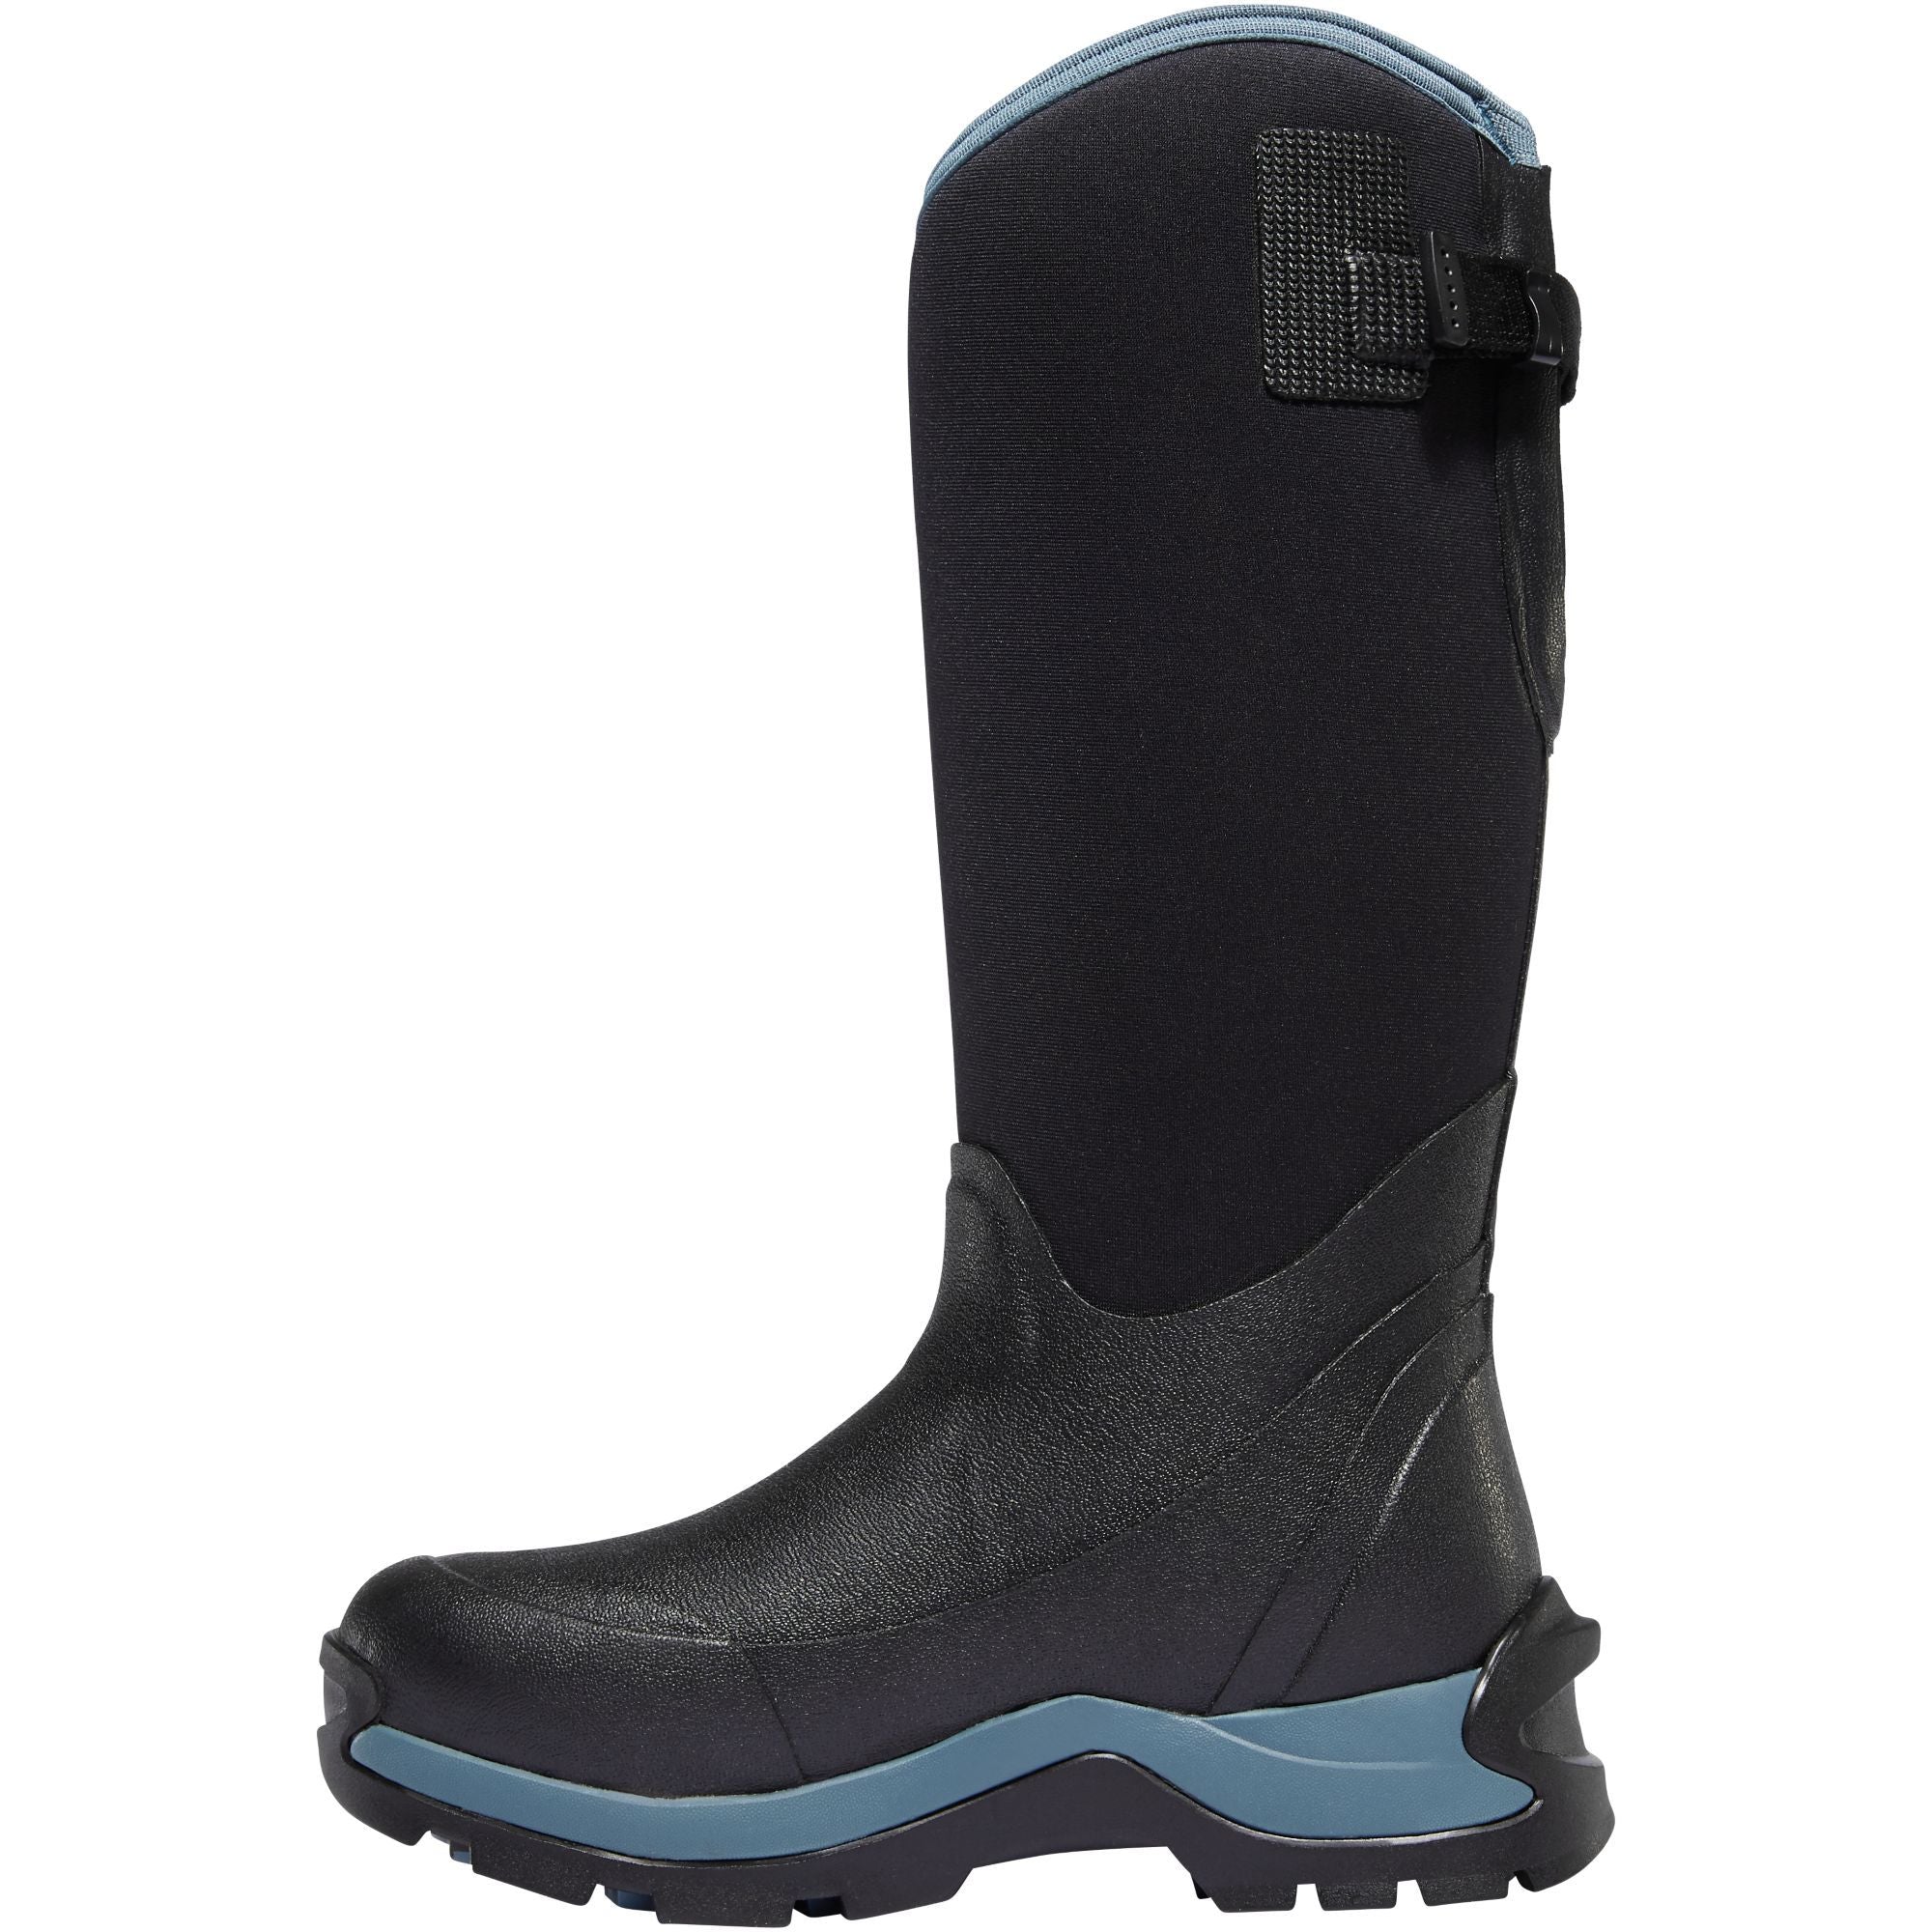 LaCrosse Women's Alpha Thermal 14" Ins Rubber Work Boot Black - 644105  - Overlook Boots